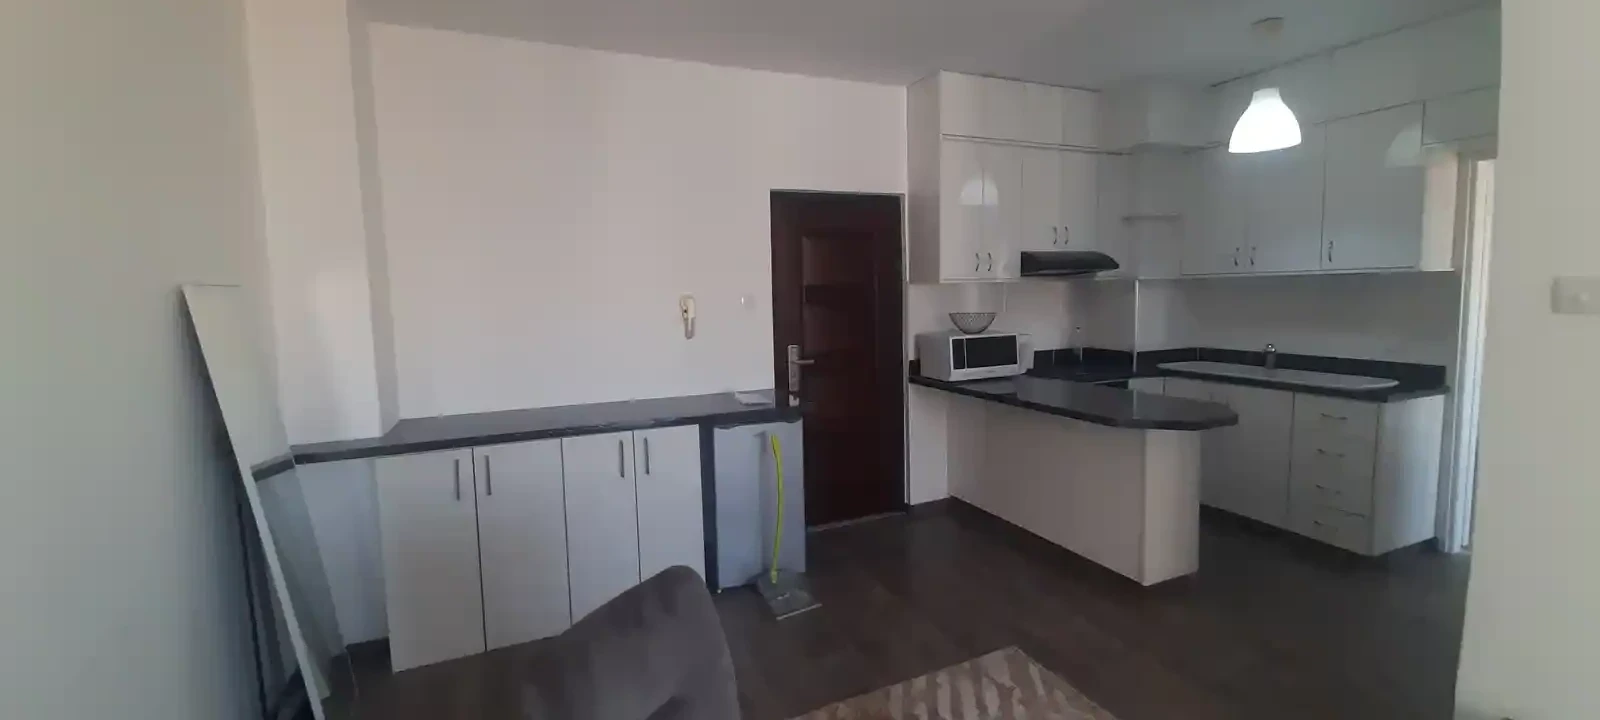 1-bedroom apartment to rent €1.400, image 1